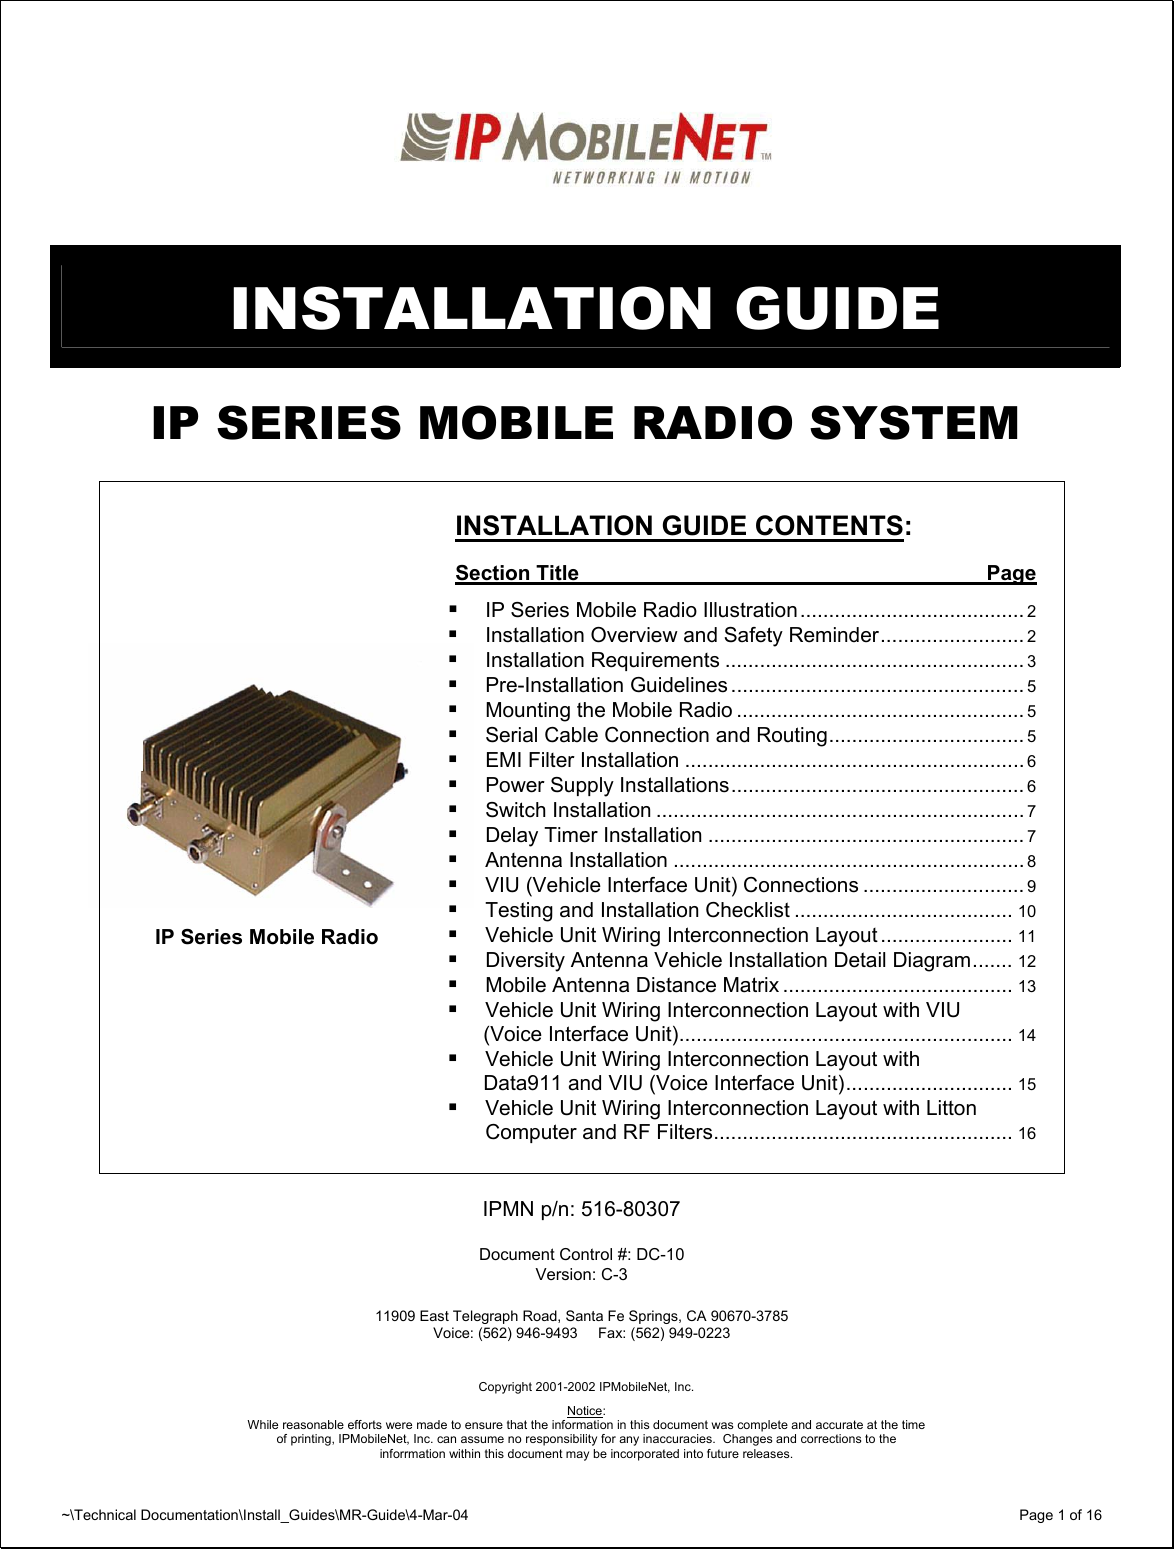 ~\Technical Documentation\Install_Guides\MR-Guide\4-Mar-04   Page 1 of 16    INSTALLATION GUIDE  IP SERIES MOBILE RADIO SYSTEM      INSTALLATION GUIDE CONTENTS:  Section Title  Page   IP Series Mobile Radio Illustration....................................... 2  Installation Overview and Safety Reminder......................... 2  Installation Requirements .................................................... 3  Pre-Installation Guidelines ................................................... 5  Mounting the Mobile Radio .................................................. 5  Serial Cable Connection and Routing.................................. 5  EMI Filter Installation ........................................................... 6  Power Supply Installations................................................... 6  Switch Installation ................................................................ 7  Delay Timer Installation ....................................................... 7  Antenna Installation ............................................................. 8  VIU (Vehicle Interface Unit) Connections ............................ 9  Testing and Installation Checklist ...................................... 10  Vehicle Unit Wiring Interconnection Layout ....................... 11  Diversity Antenna Vehicle Installation Detail Diagram....... 12  Mobile Antenna Distance Matrix ........................................ 13  Vehicle Unit Wiring Interconnection Layout with VIU   (Voice Interface Unit).......................................................... 14  Vehicle Unit Wiring Interconnection Layout with   Data911 and VIU (Voice Interface Unit)............................. 15  Vehicle Unit Wiring Interconnection Layout with Litton Computer and RF Filters.................................................... 16   IPMN p/n: 516-80307  Document Control #: DC-10 Version: C-3  11909 East Telegraph Road, Santa Fe Springs, CA 90670-3785 Voice: (562) 946-9493     Fax: (562) 949-0223     Copyright 2001-2002 IPMobileNet, Inc.  Notice:  While reasonable efforts were made to ensure that the information in this document was complete and accurate at the time of printing, IPMobileNet, Inc. can assume no responsibility for any inaccuracies.  Changes and corrections to the  inforrmation within this document may be incorporated into future releases.IP Series Mobile Radio 